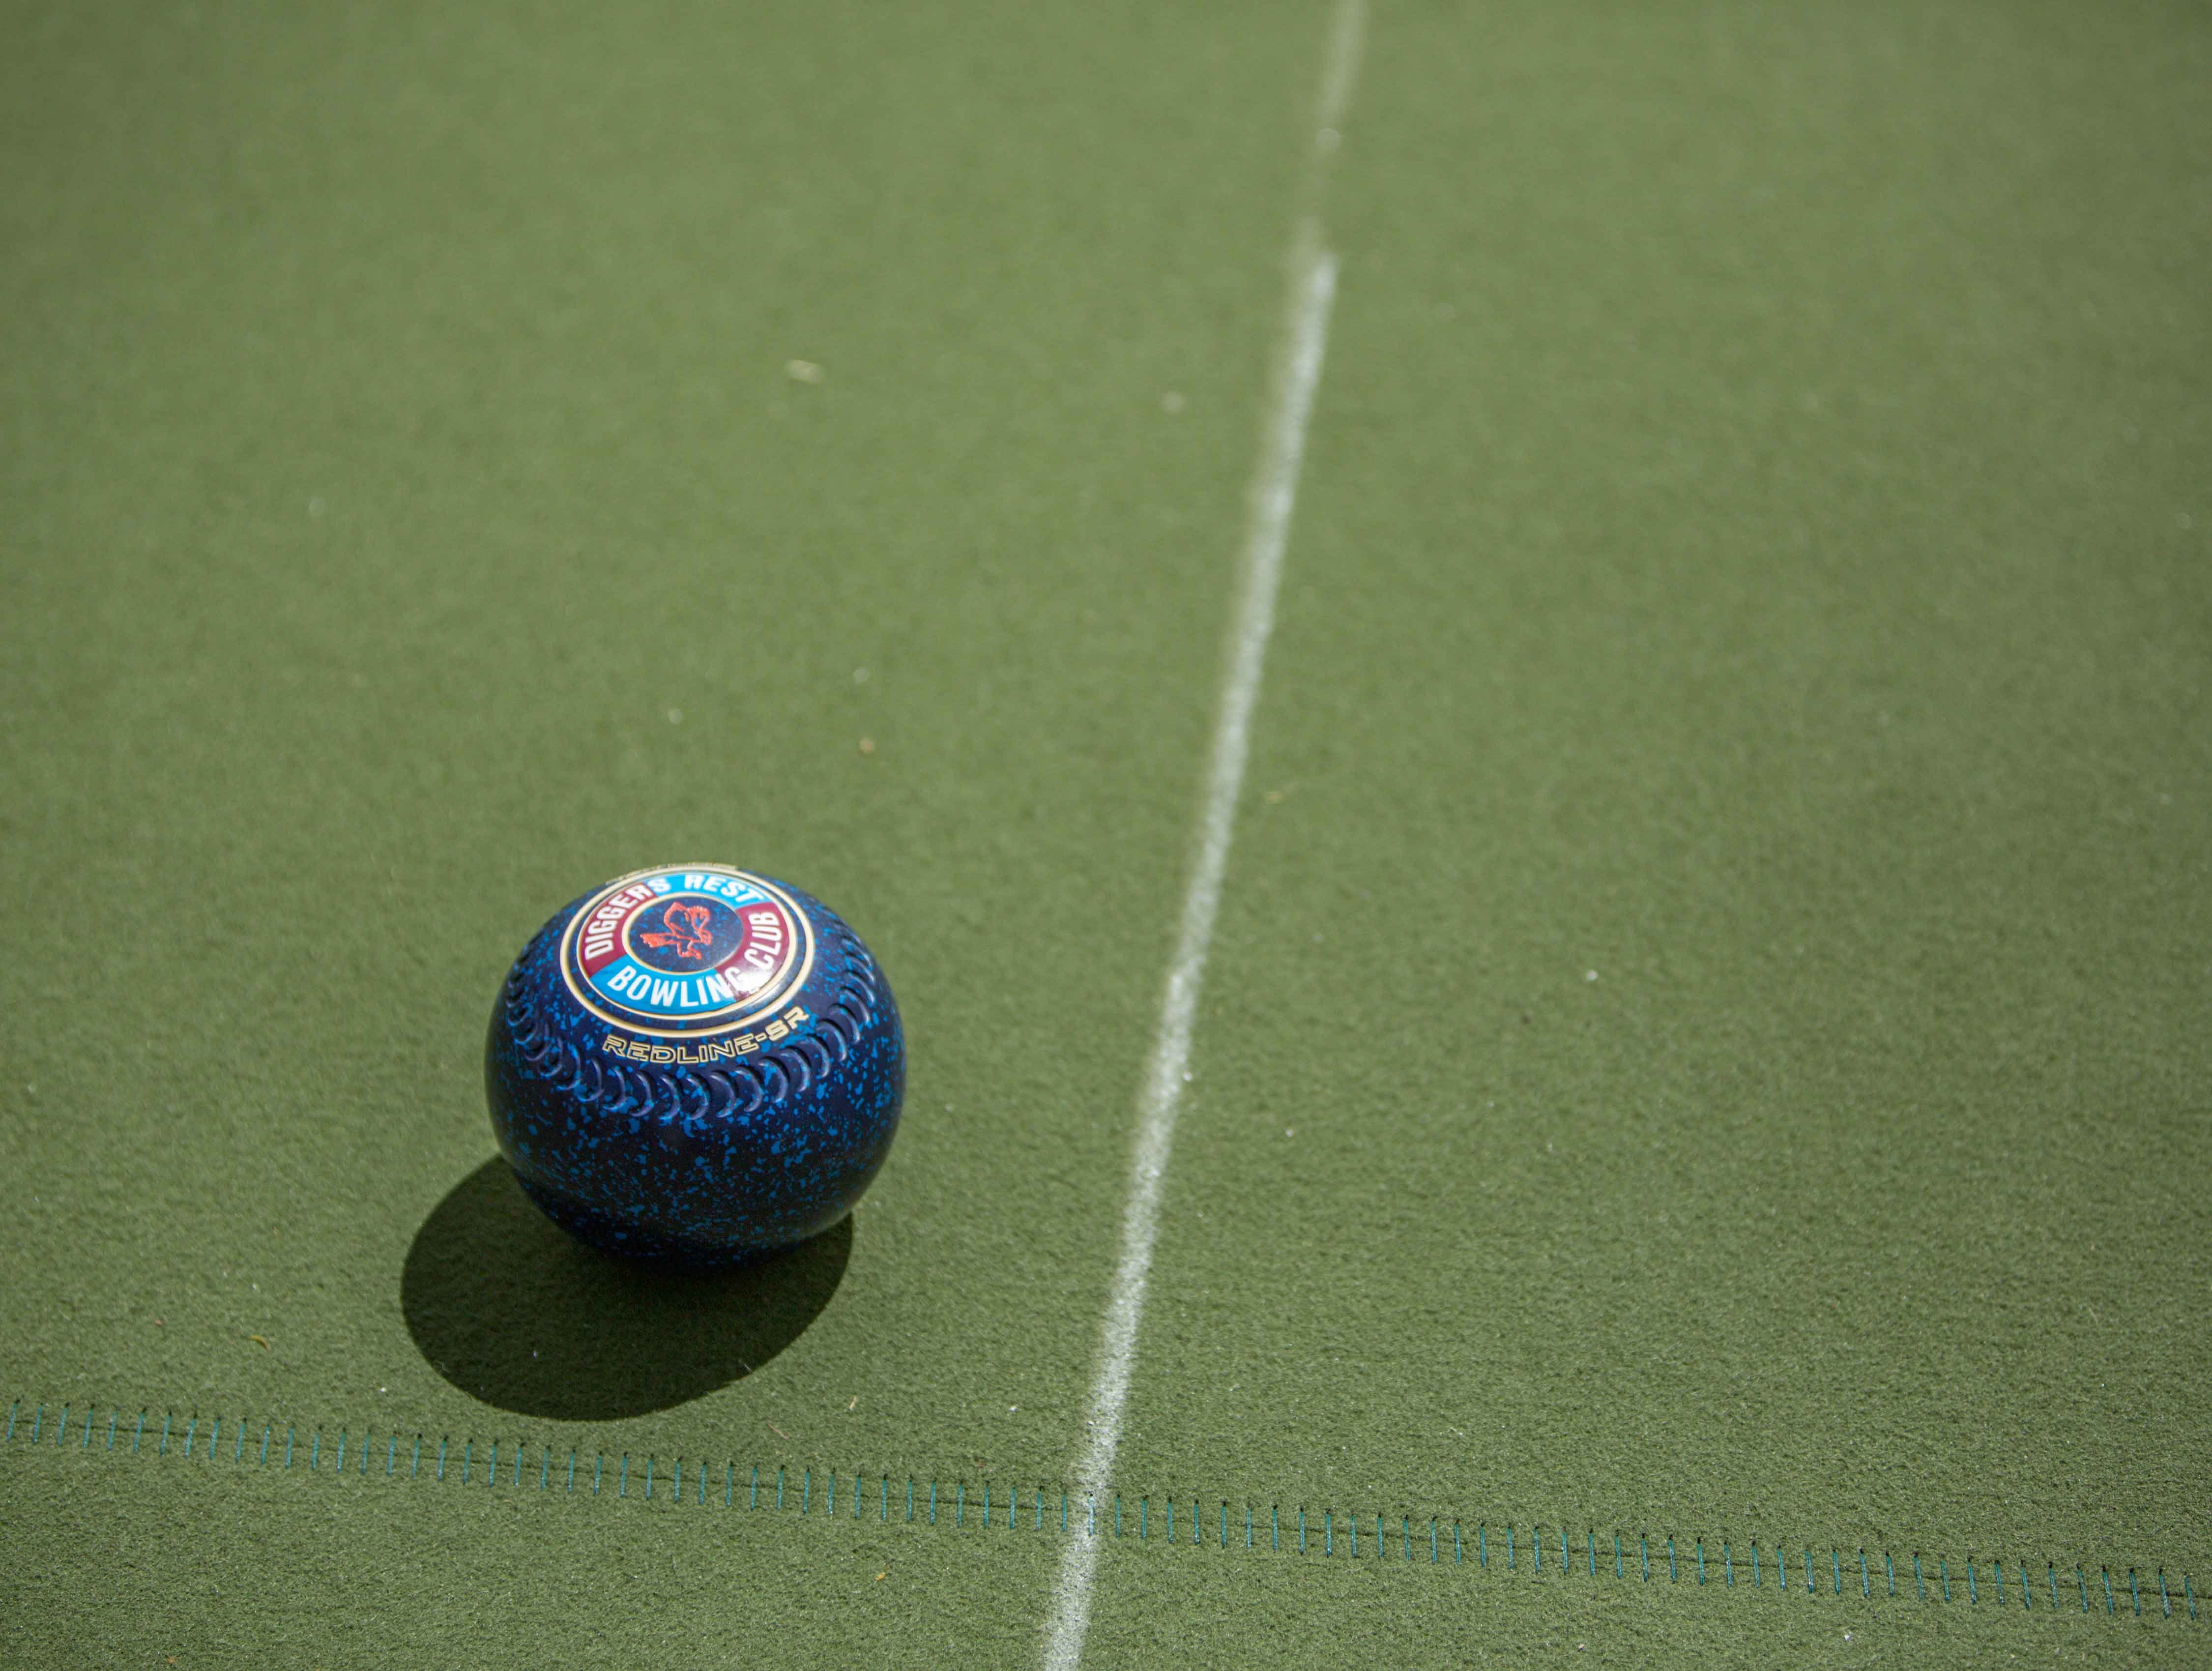 Close up of blue lawn bowl on an outdoor synthetic turf surface with a white line marking